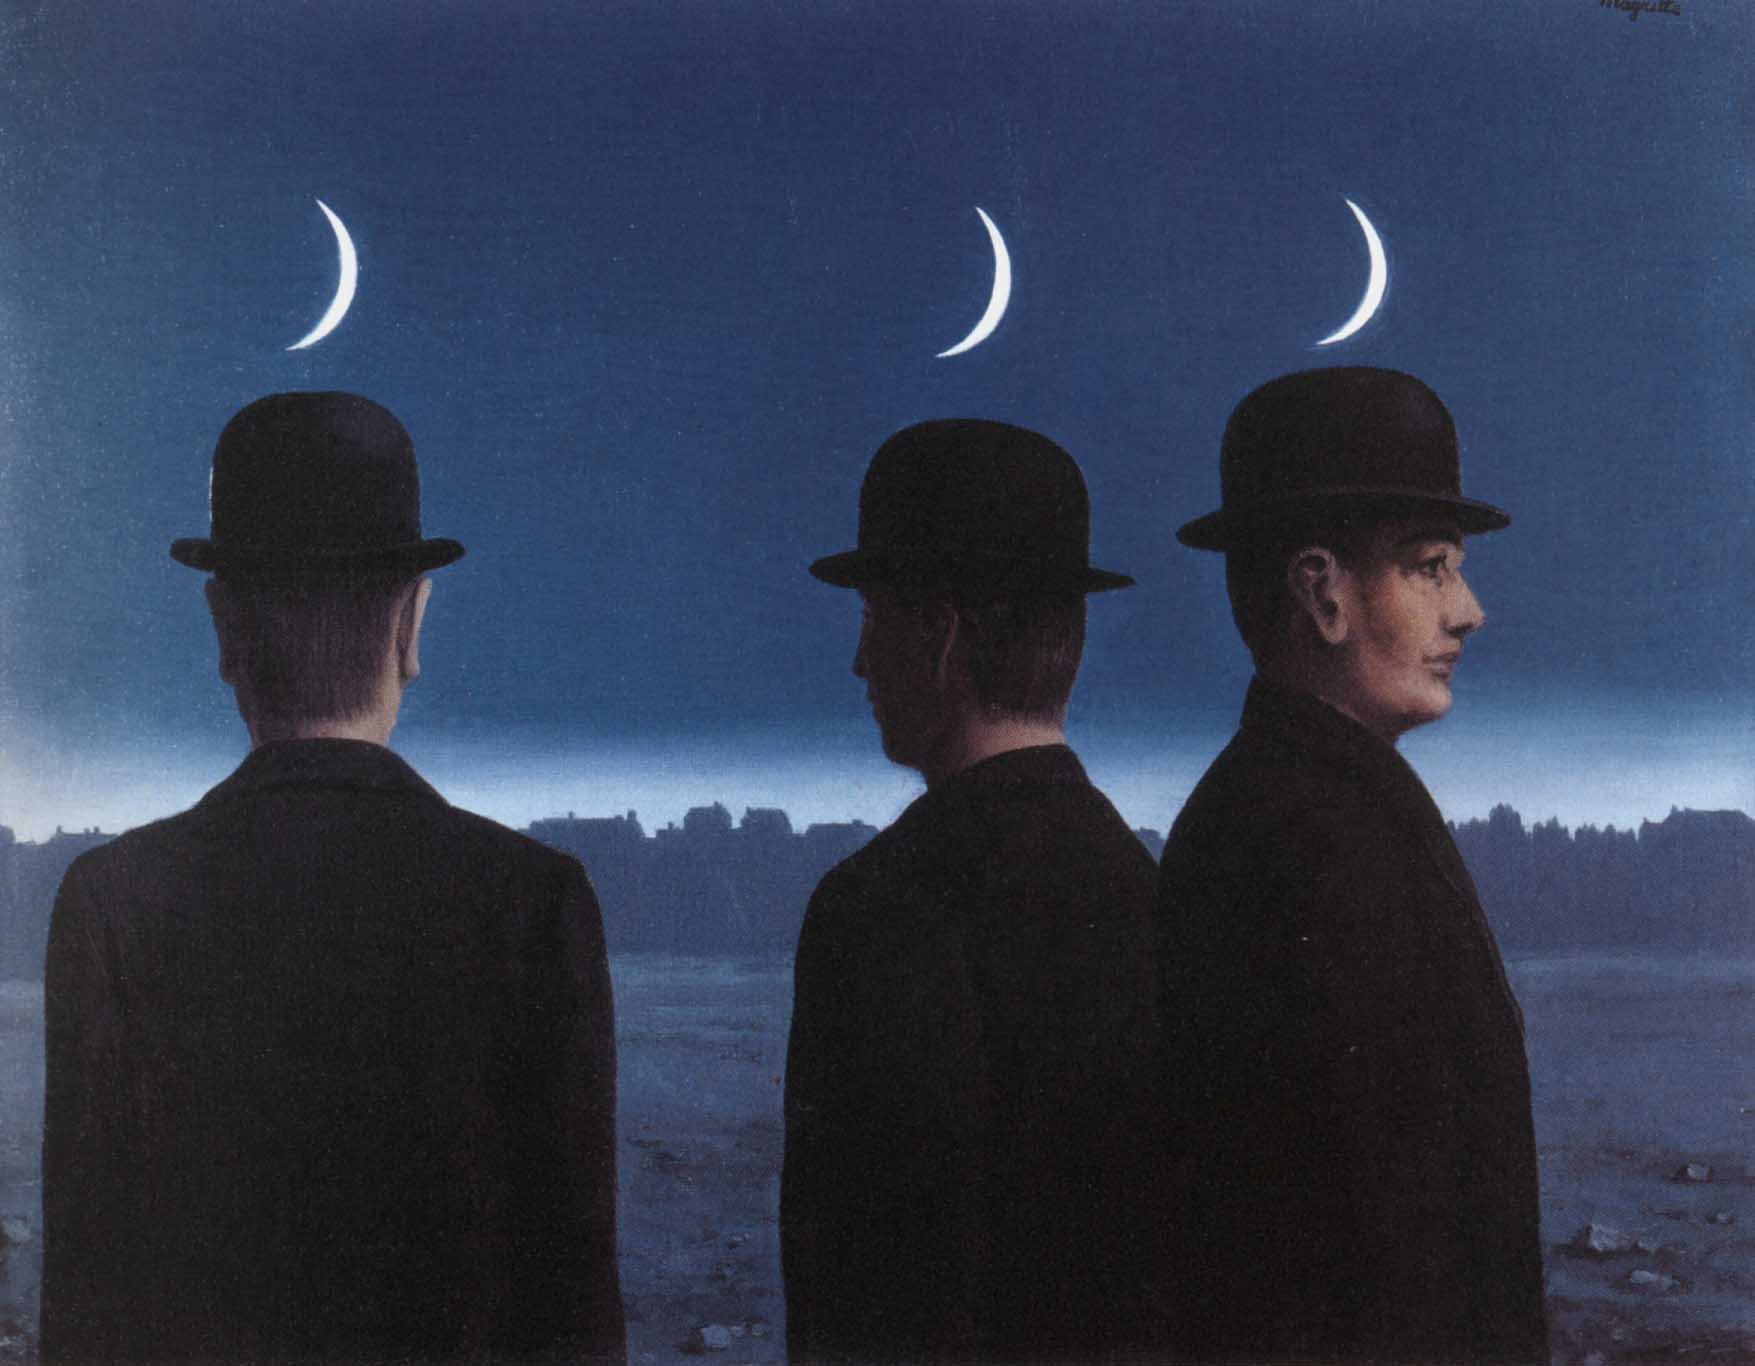 René Magritte, The Mysteries of the Horizon, 1955, private collection. nocturnal paintings